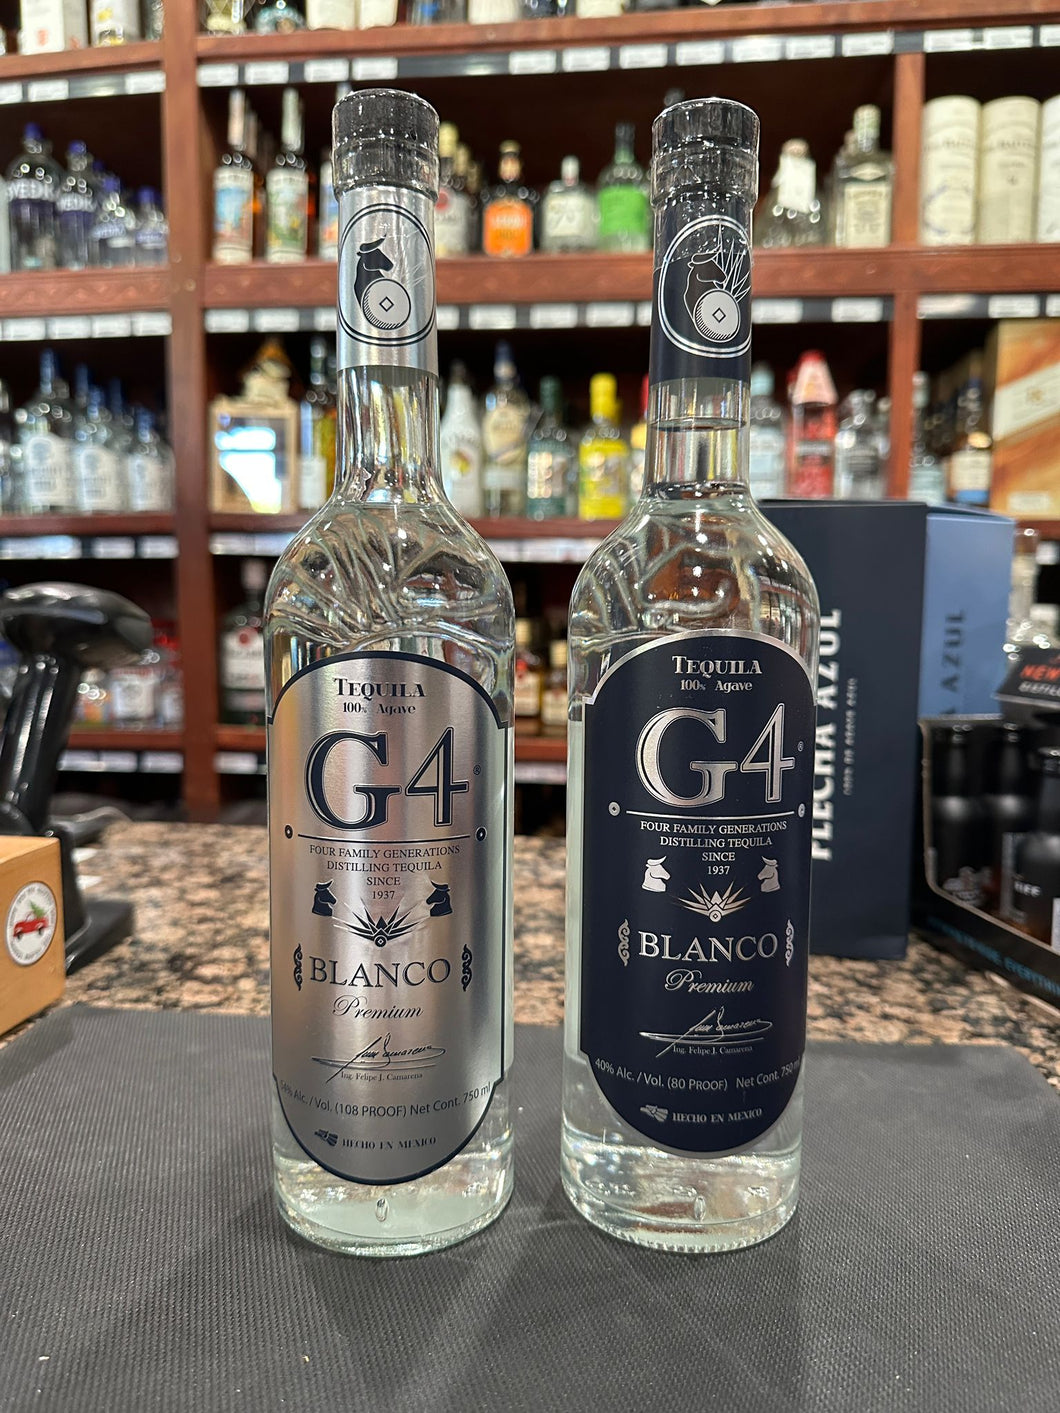 G4 108 Proof Blanco Tequila and G4 Blanco Tequila Combo 750ml